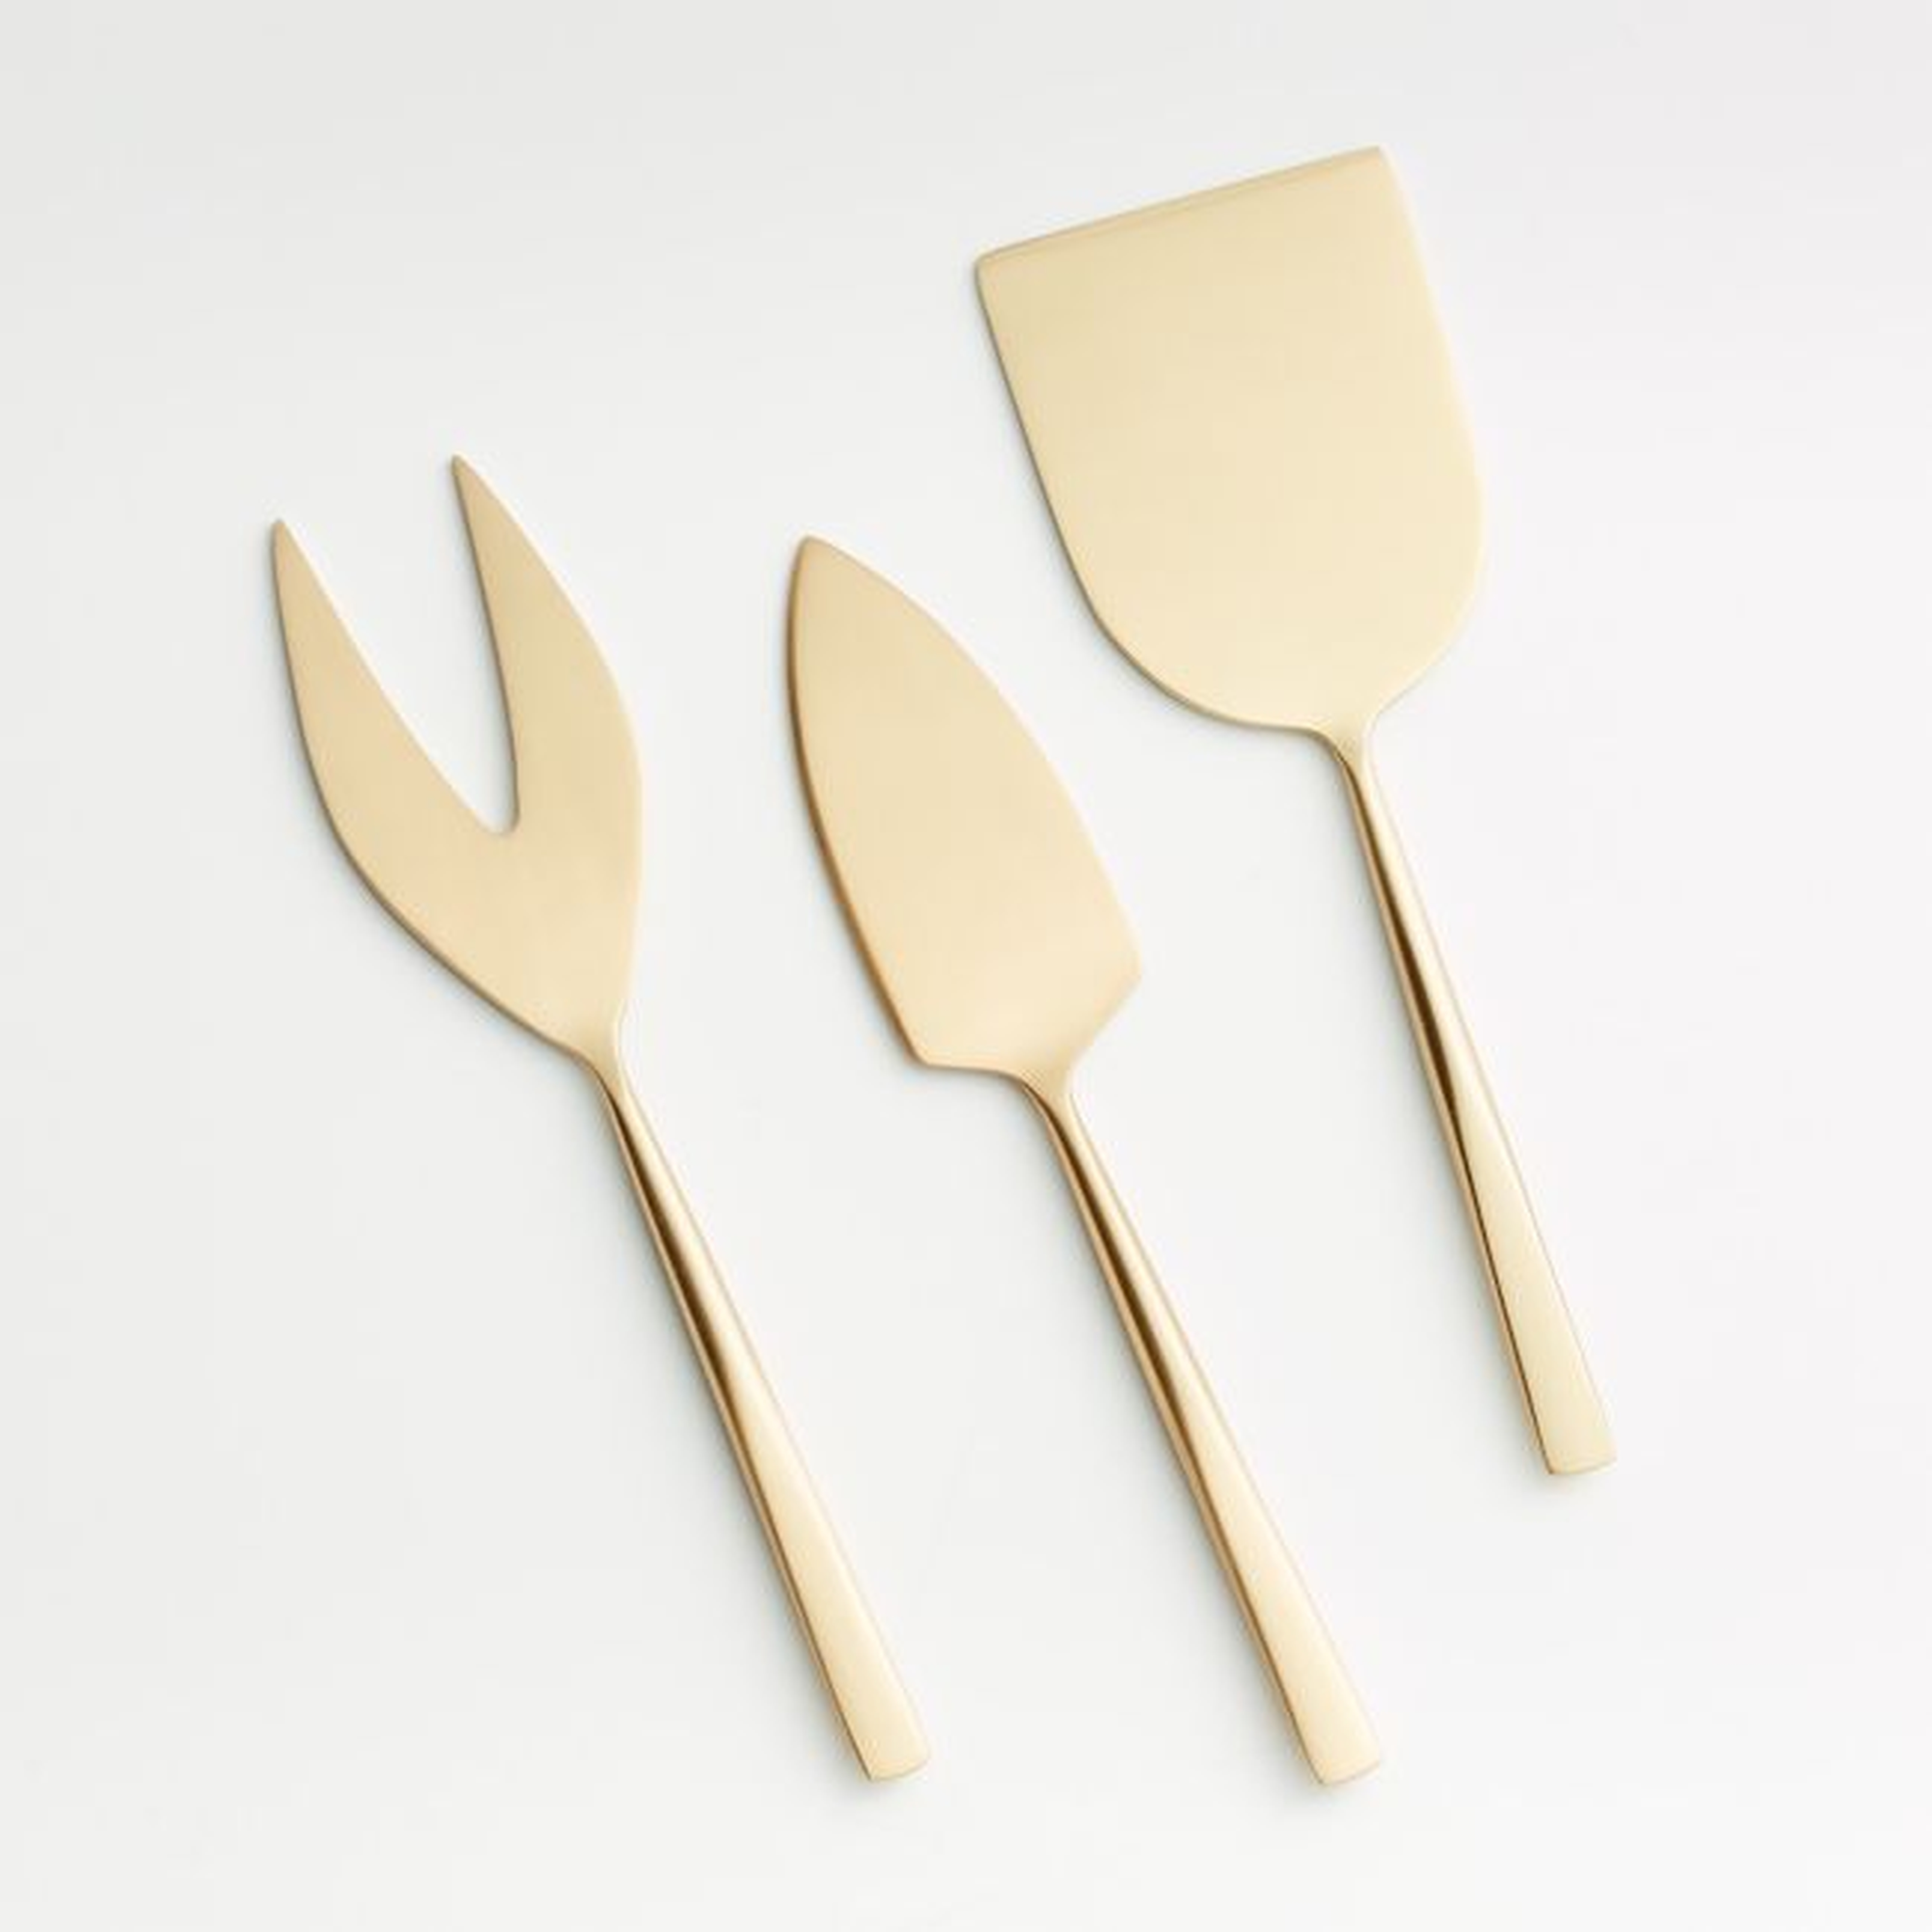 Gold Cheese Knives, Set of 3 - Crate and Barrel